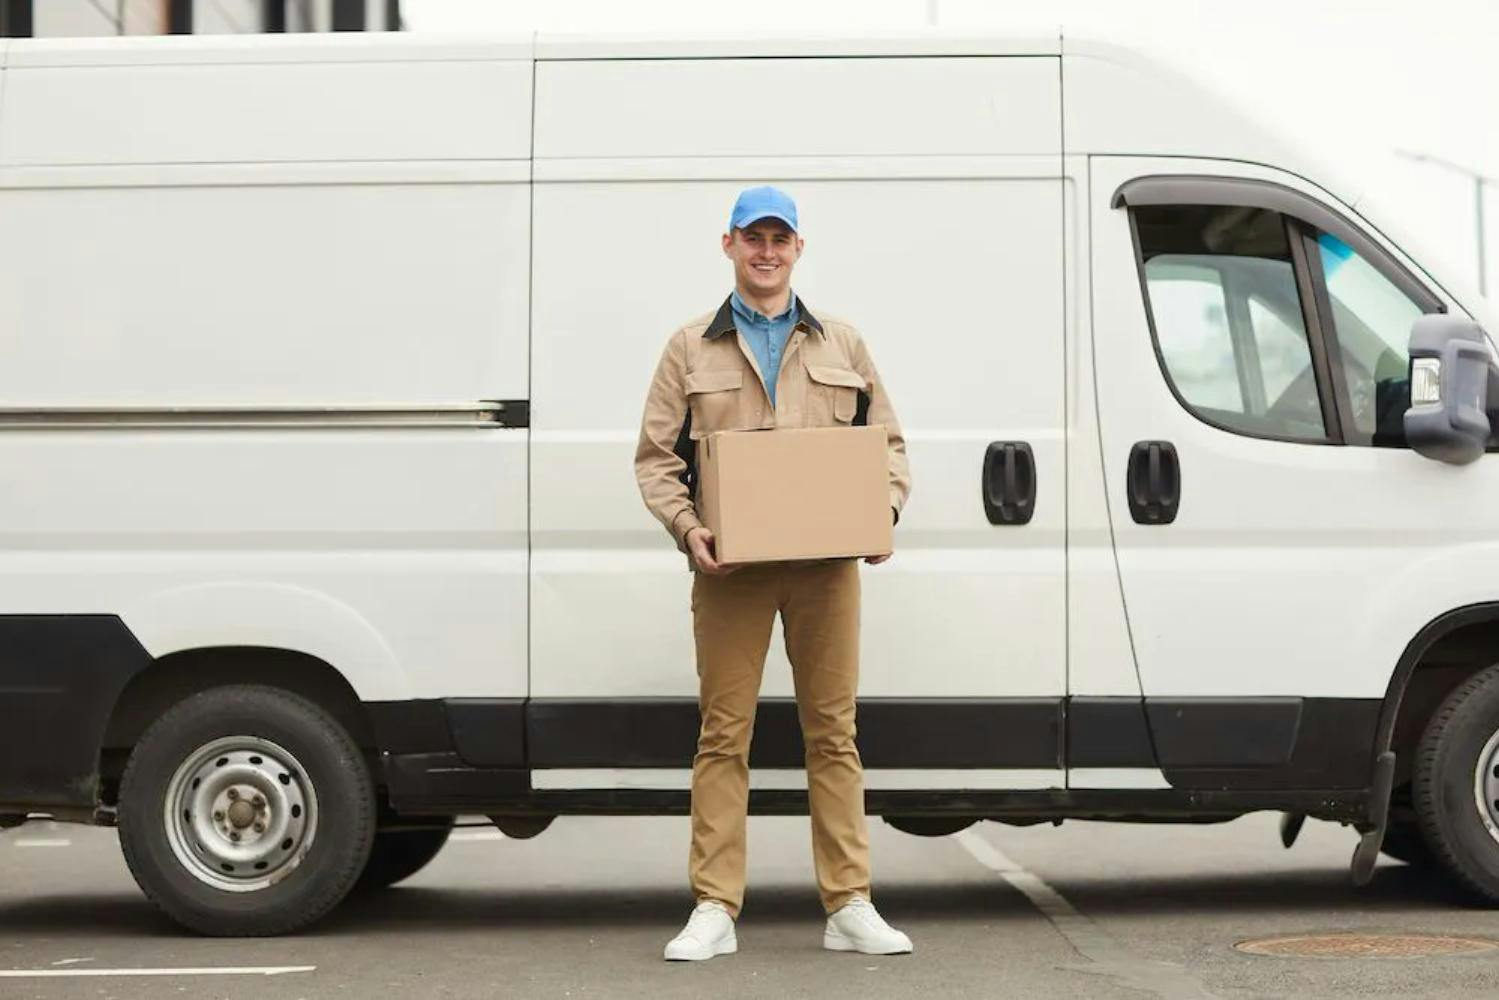 What are the benefits of “On Demand Delivery” for Shoppers_